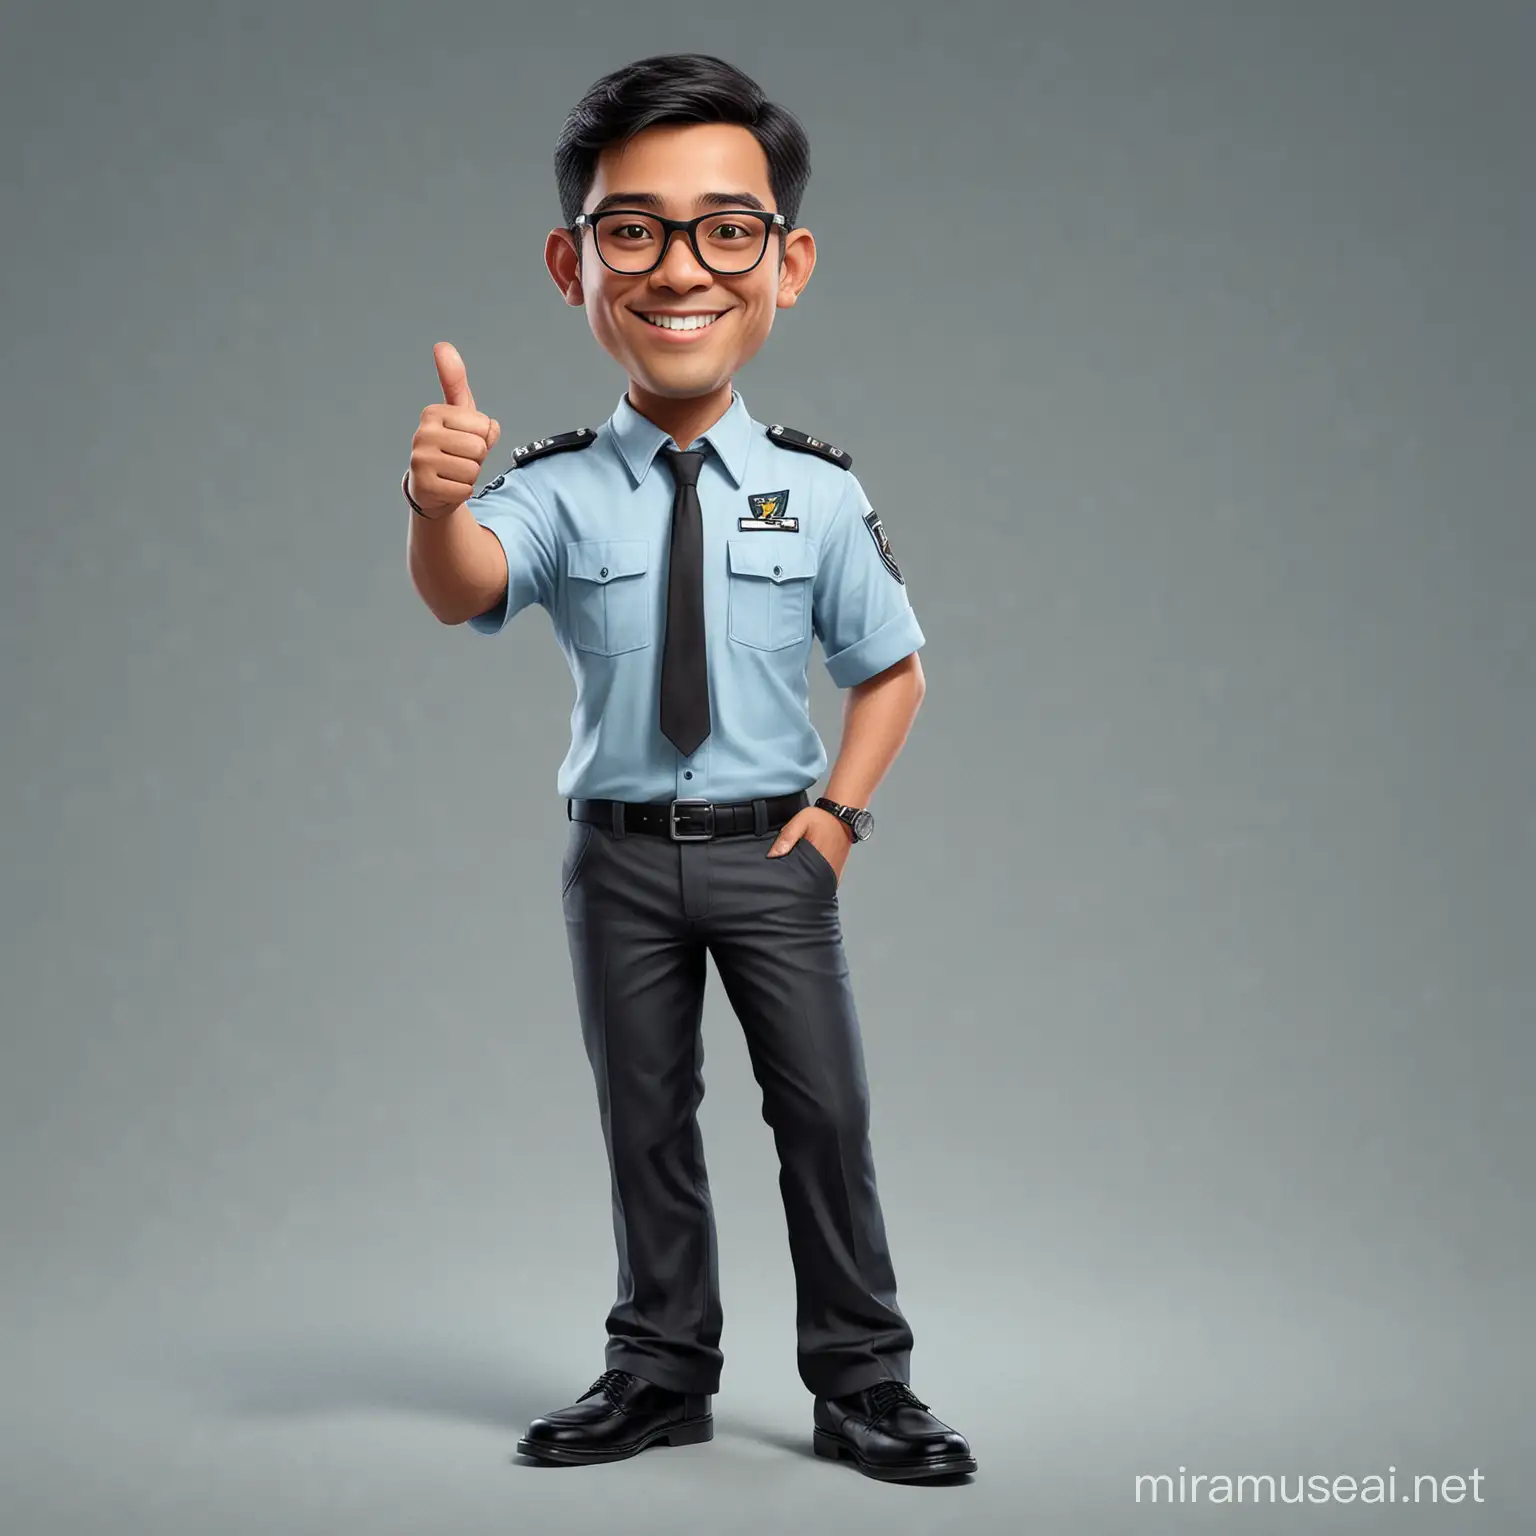 Smiling Indonesian Pilot Giving Thumbs Up in Neat Uniform Portrait